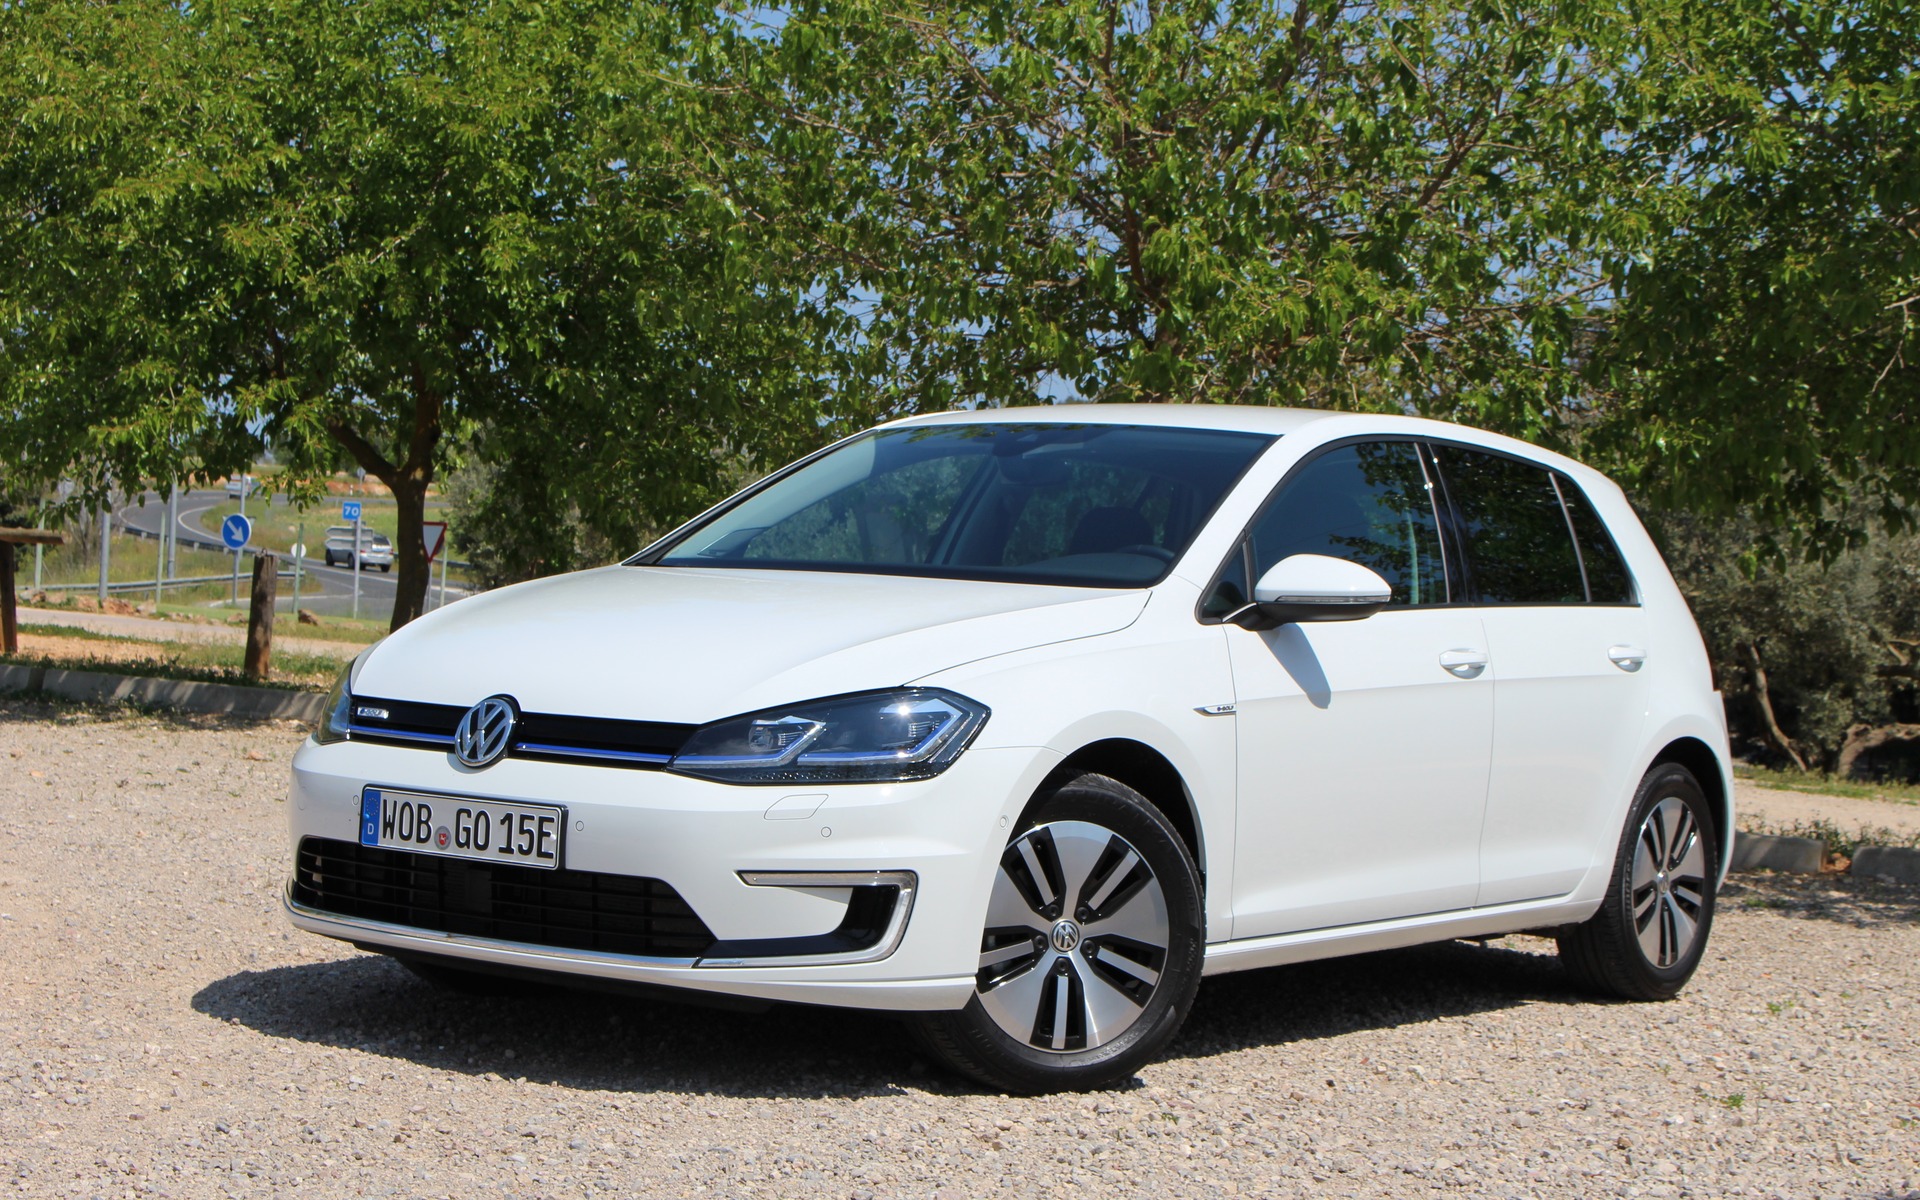 2017 Volkswagen e-Golf: Watch Out, Bolt - The Car Guide